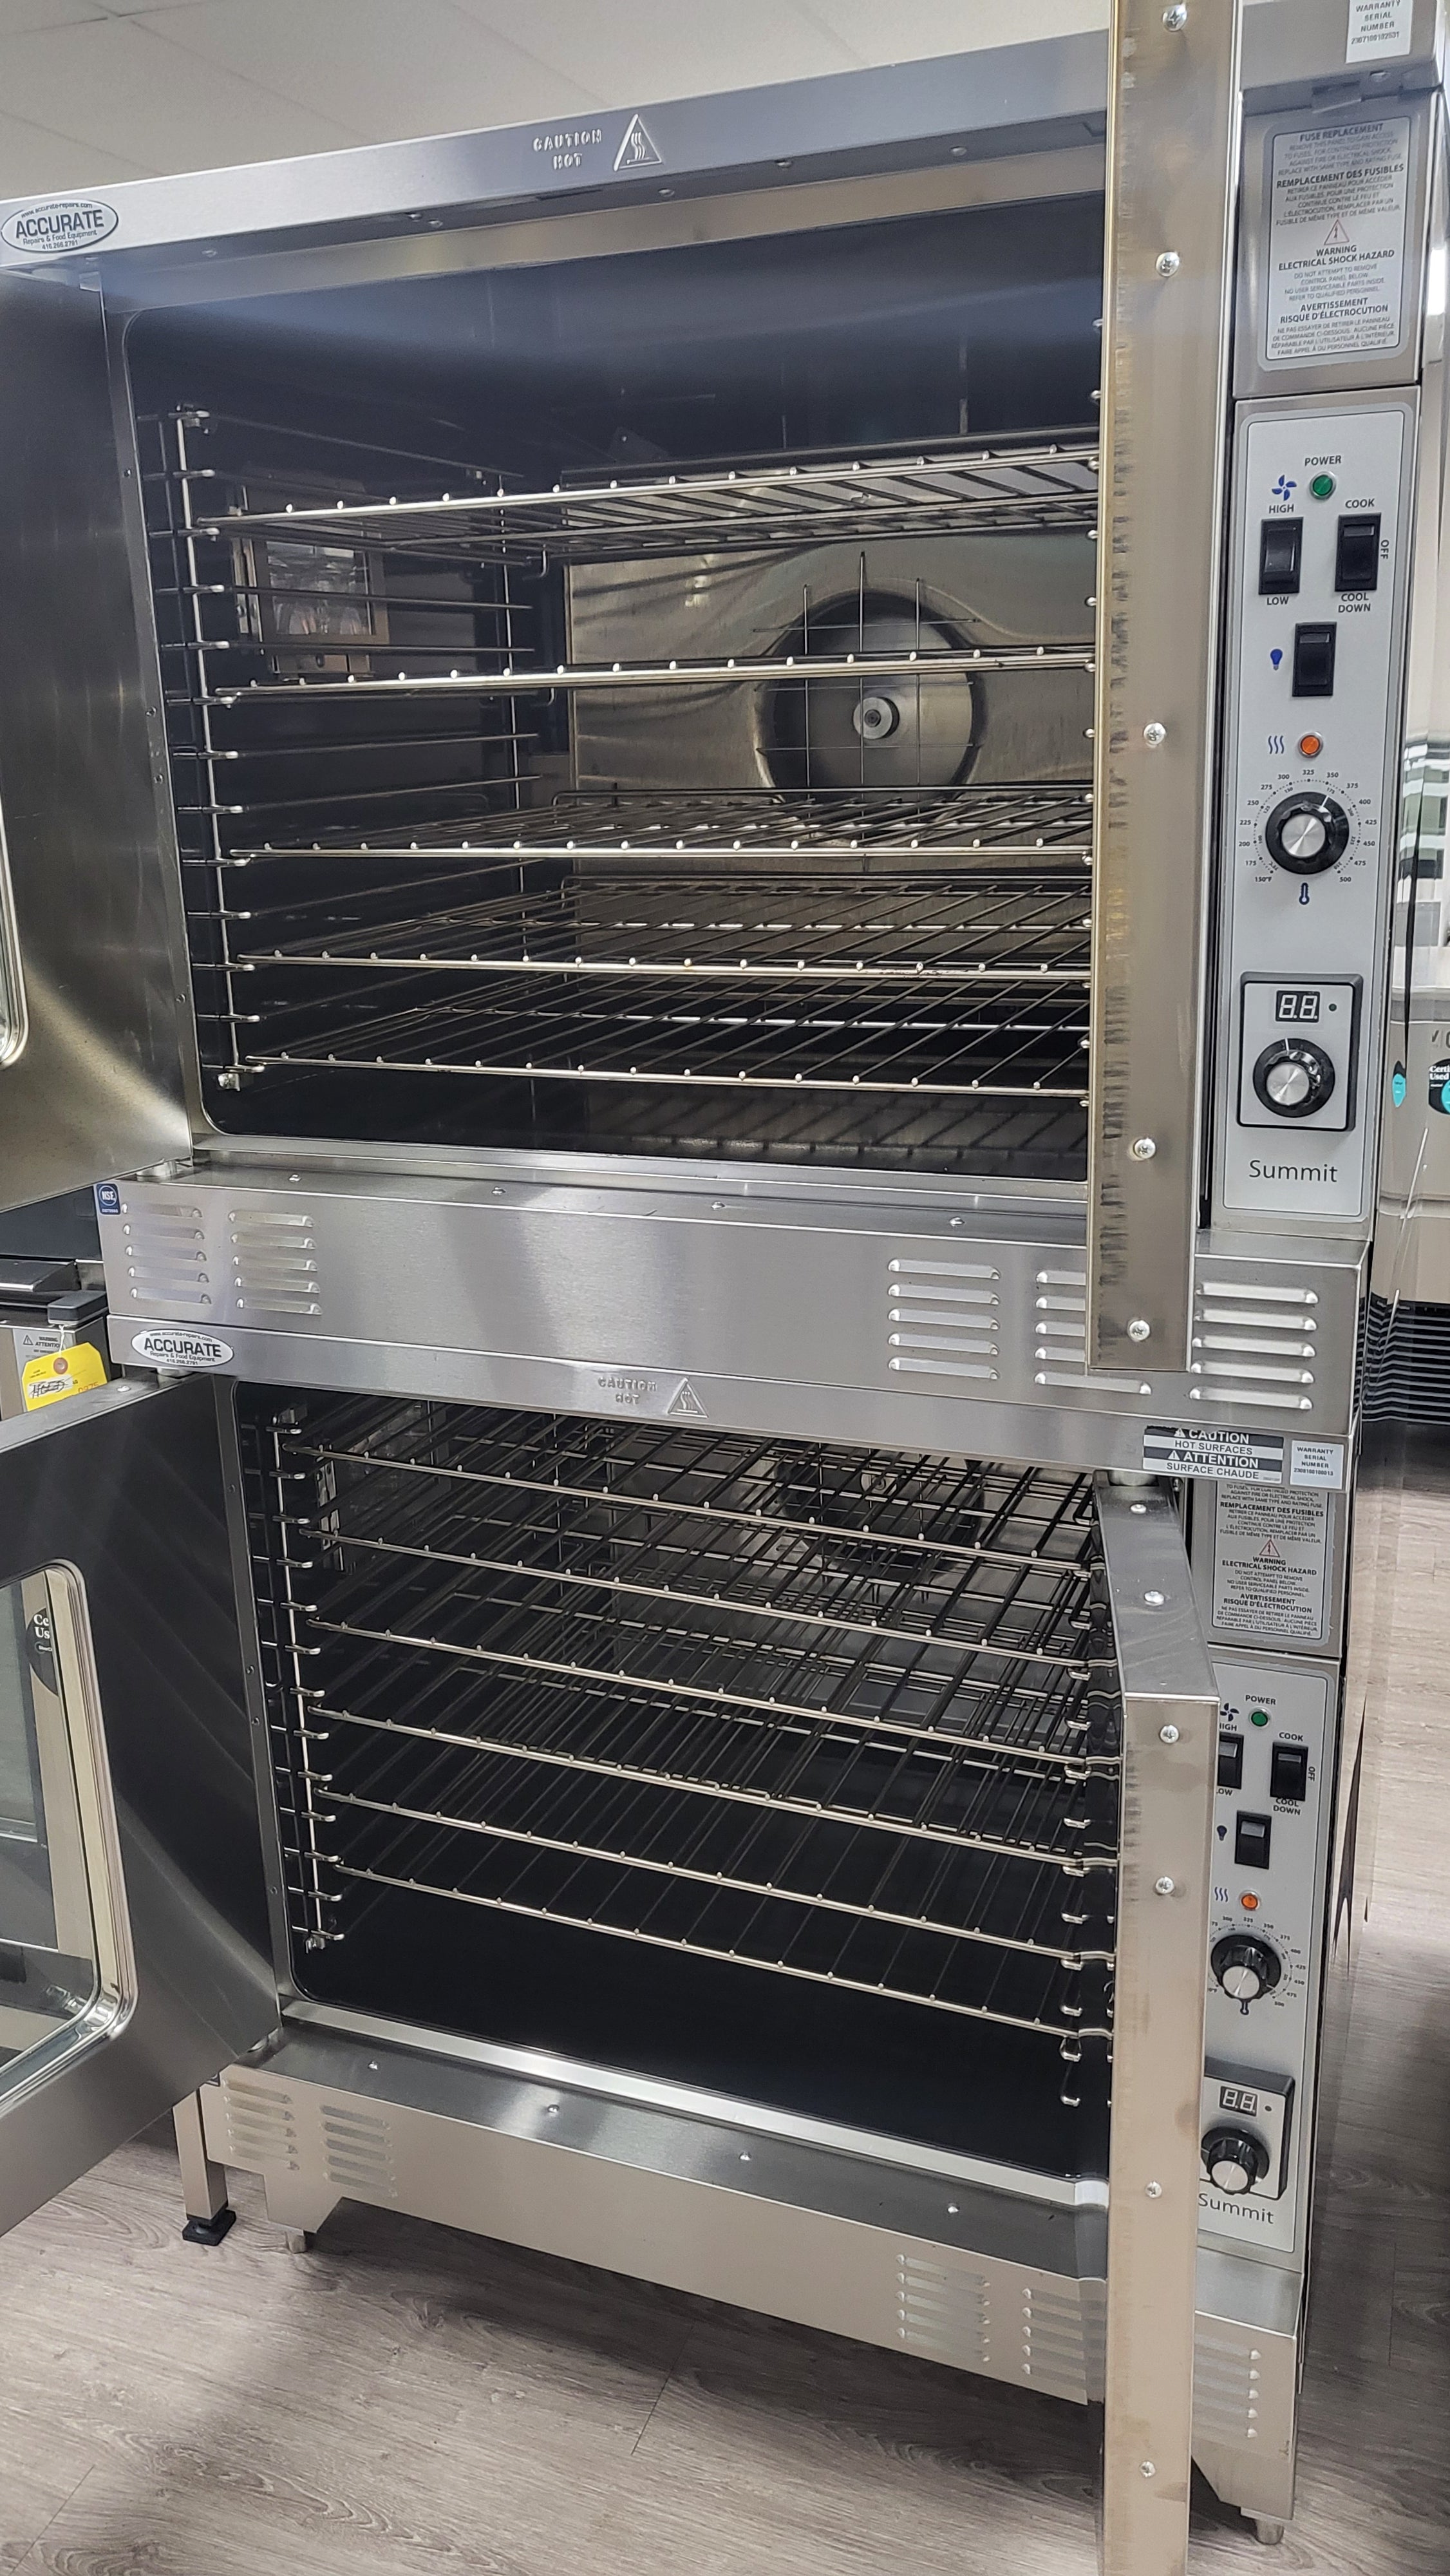 Thumbnail - Garland SUME-200 Convection Oven